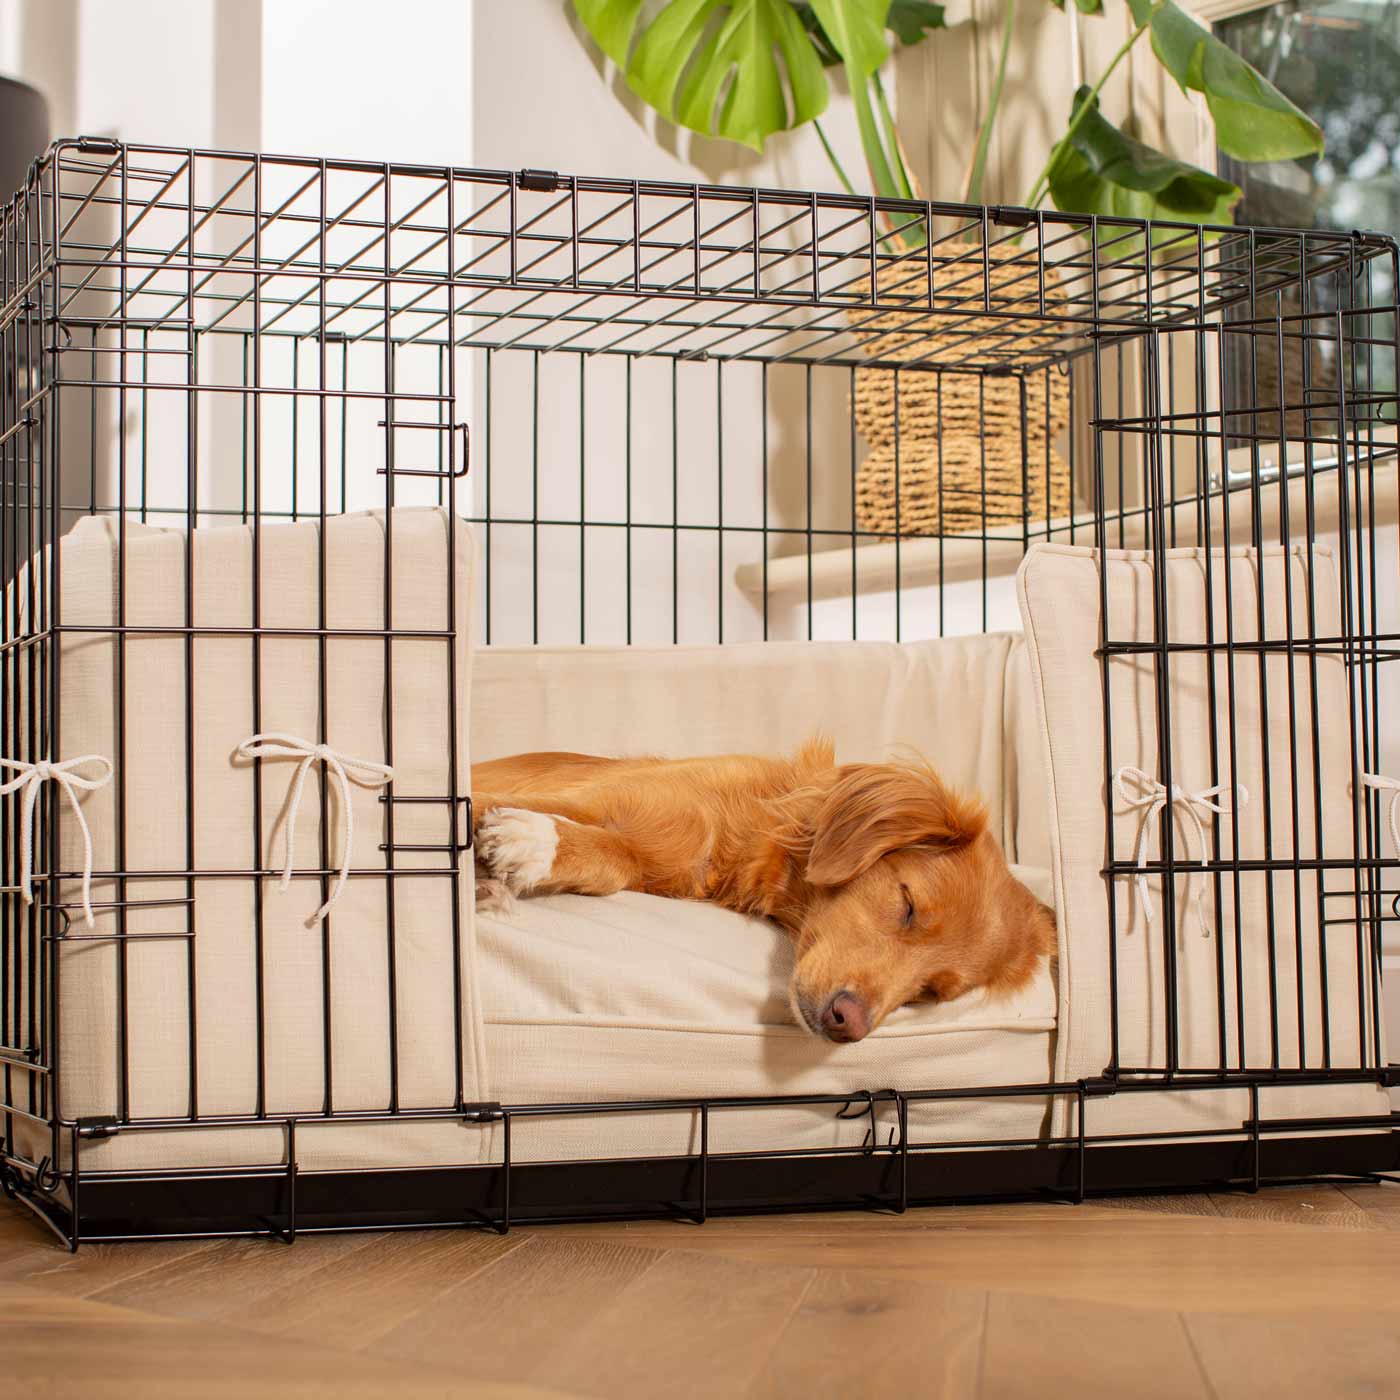 Discover our Luxury Dog Crate Bumper, in Savanna Bone. The Perfect Dog Crate Accessory, Available To Personalise Now at Lords & Labradors